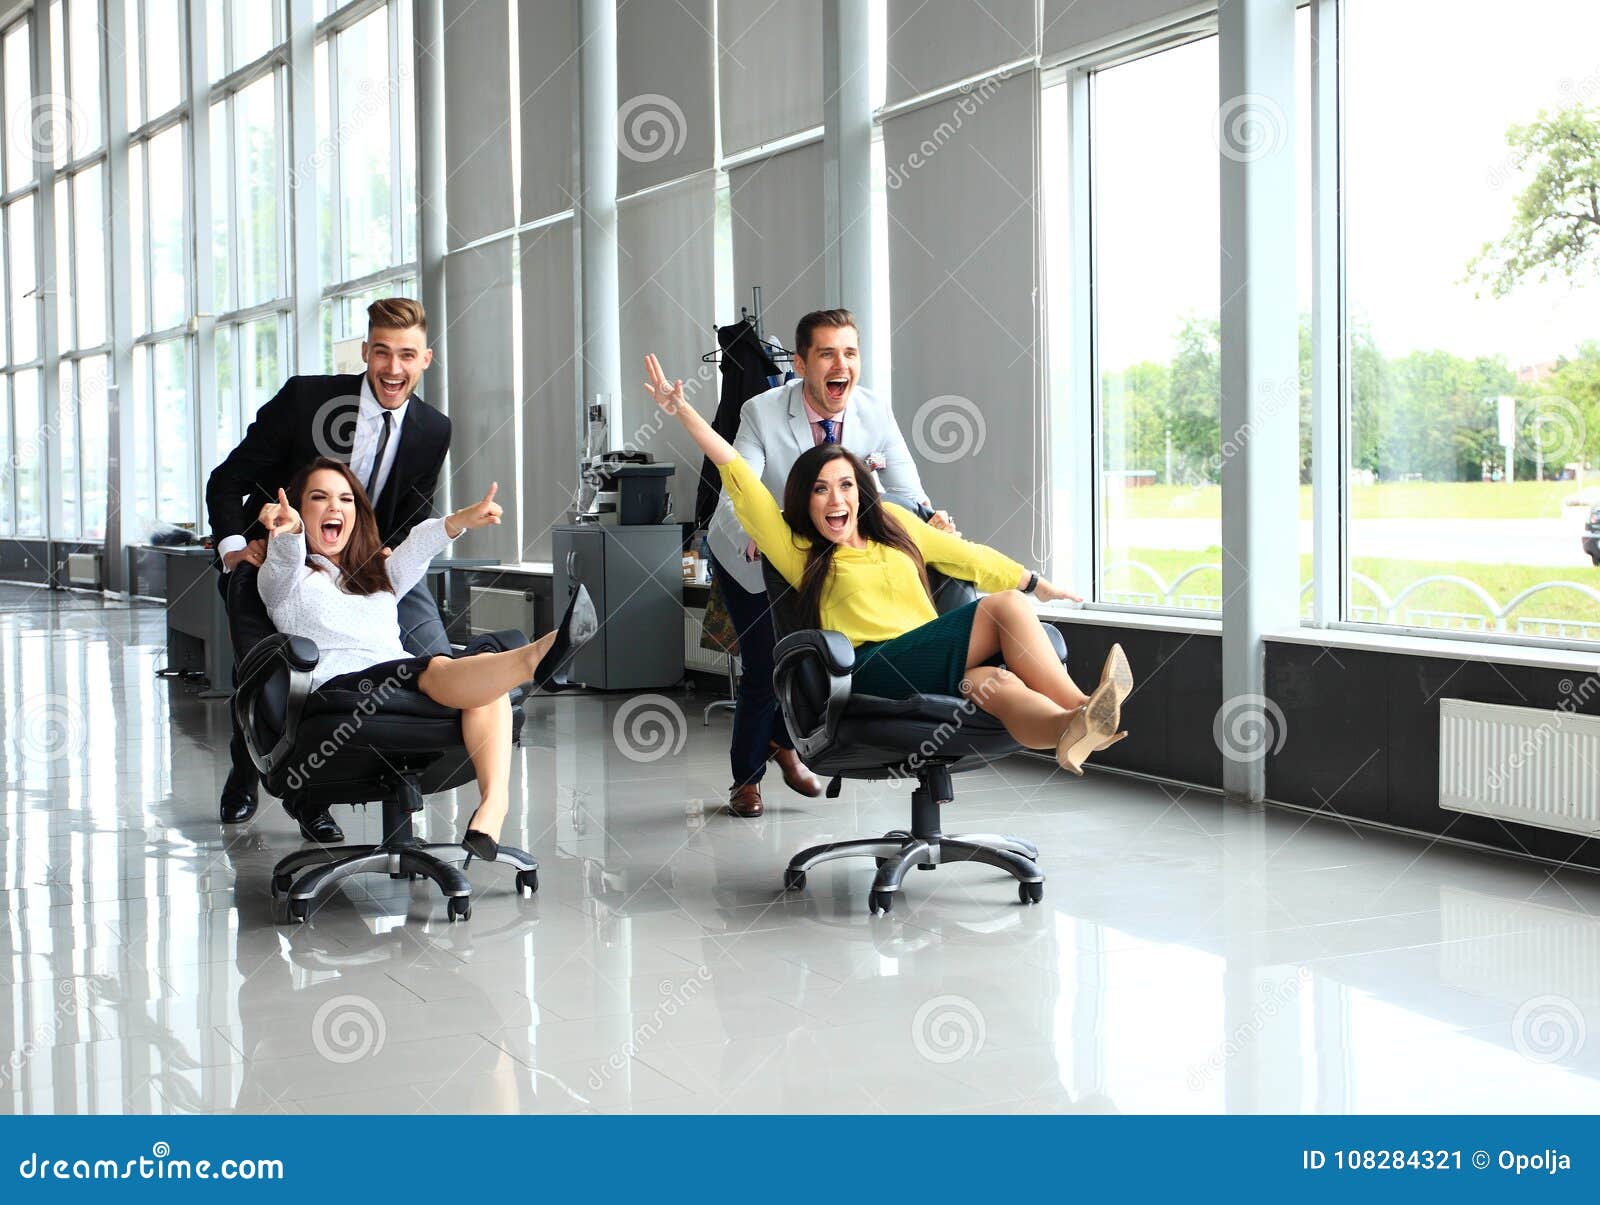 Cheerful Colleagues Having Fun In Office Chairs Stock Image